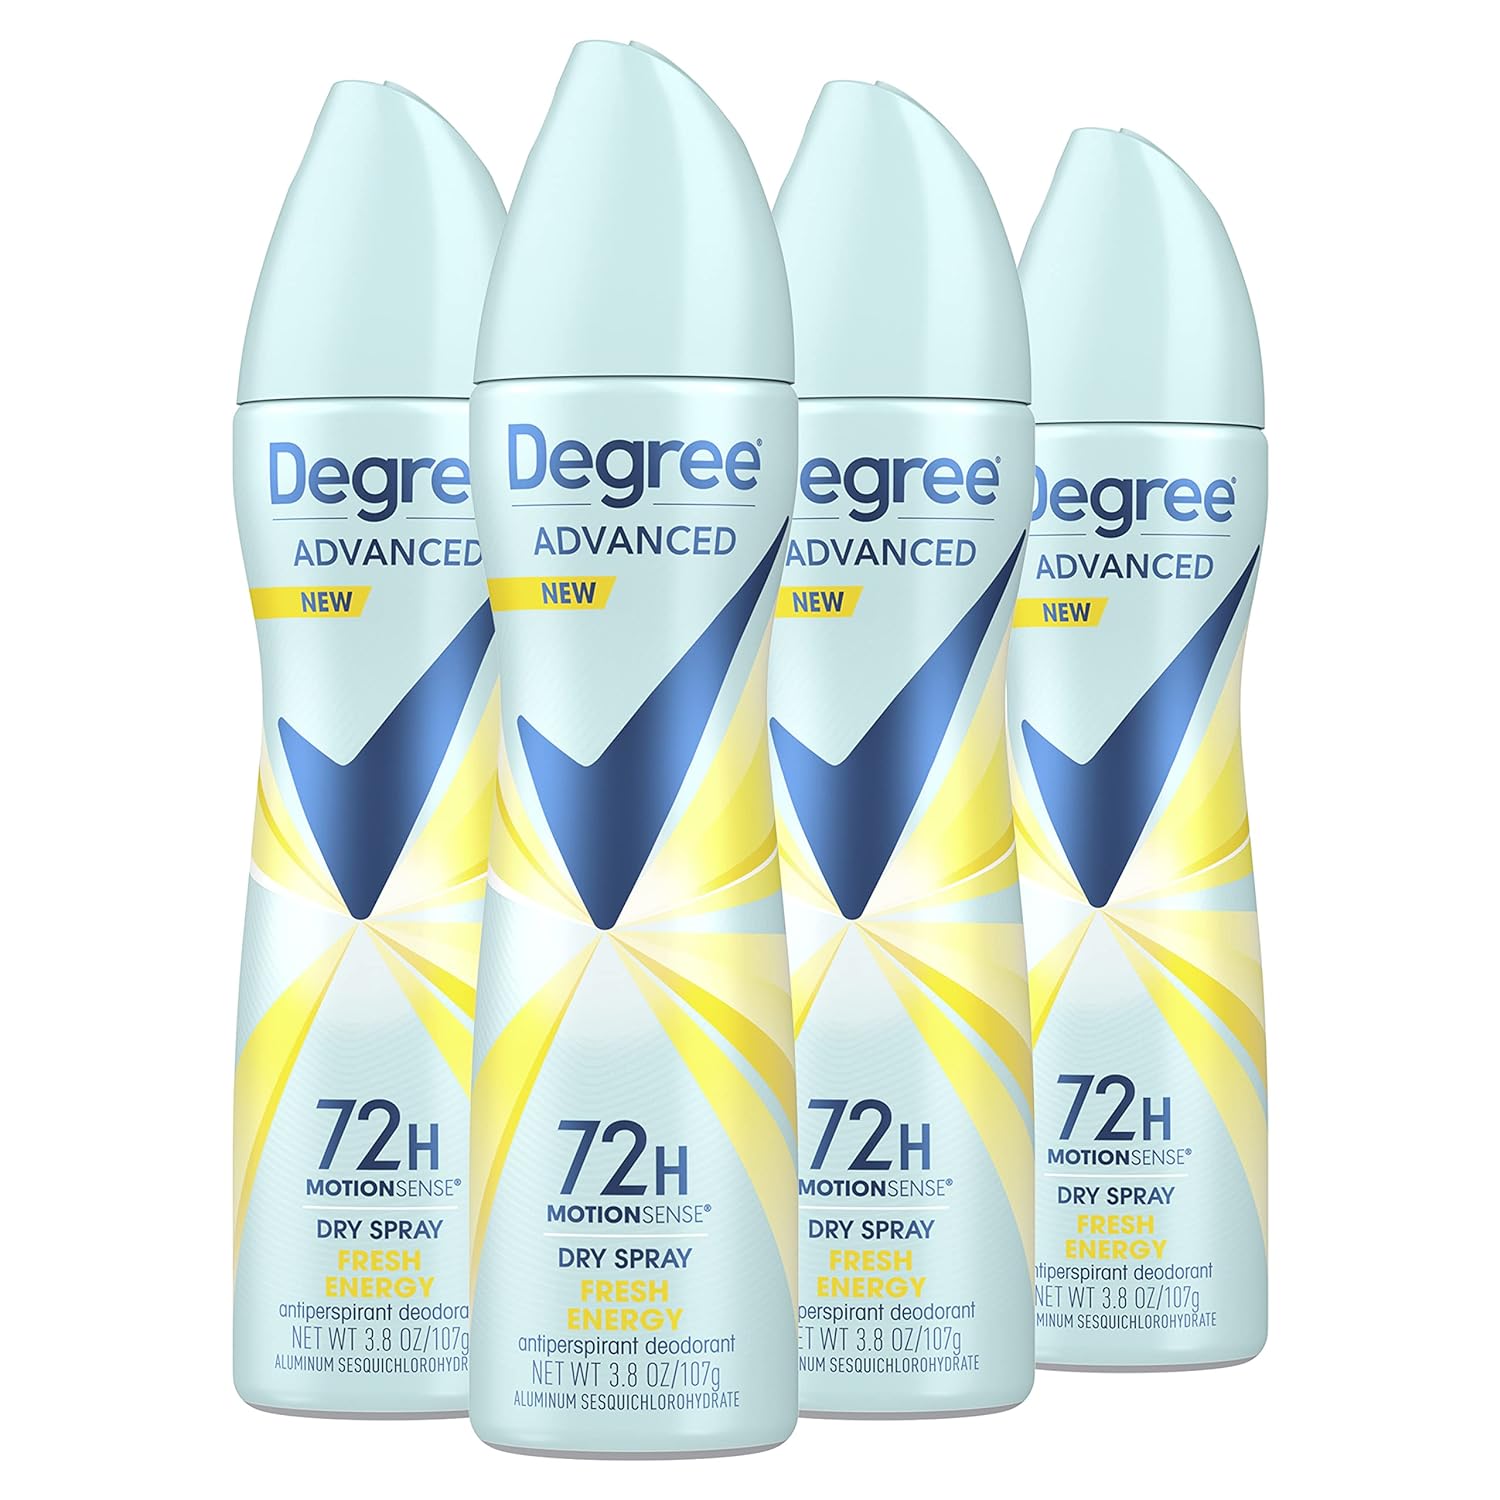 Degree Advanced Antiperspirant Deodorant Dry Spray 72-Hour Sweat and Odor Protection Fresh Energy Deodorant Spray For Women With MotionSense Technology 3.8 oz, Pack of 4 , Blue